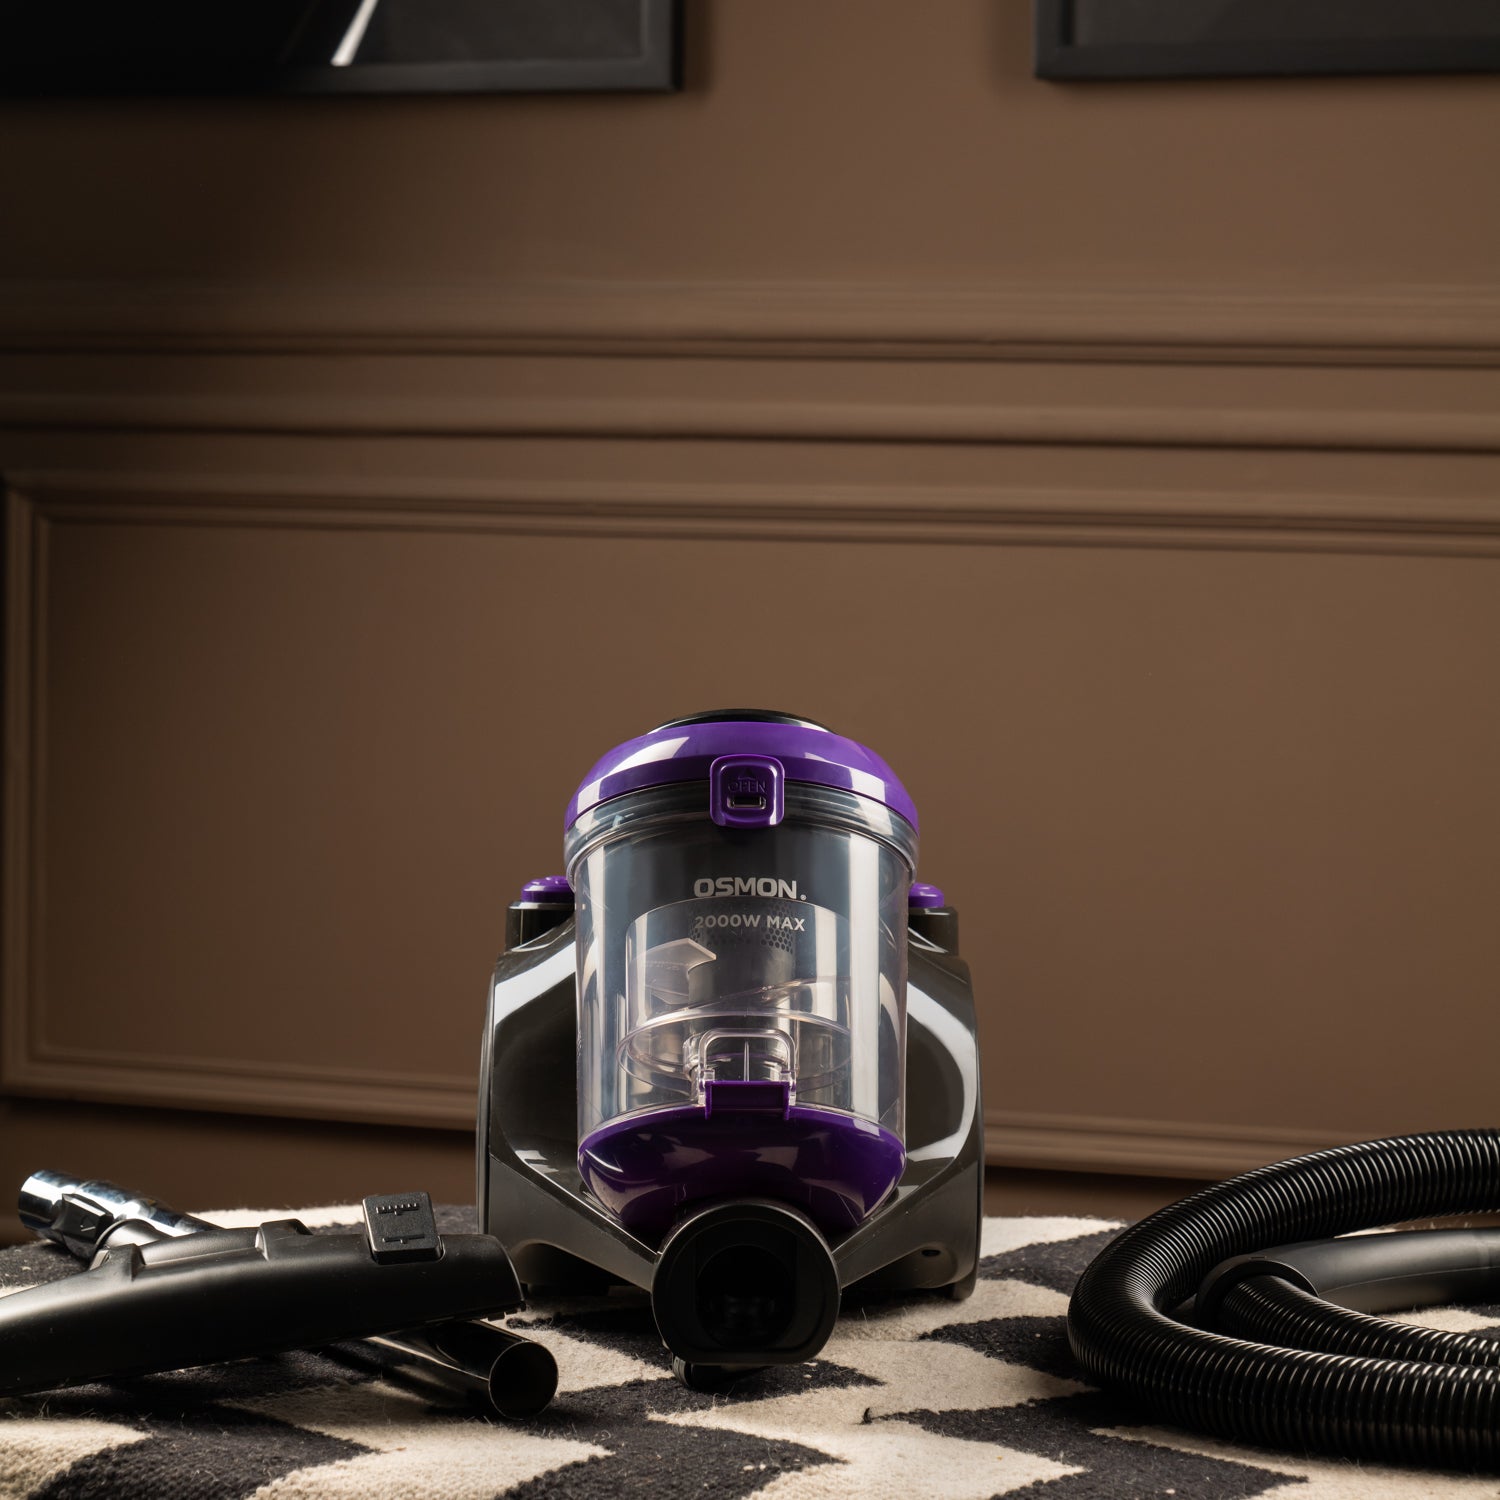 A sleek purple and black vacuum cleaner, the OS 2000BL, stands tall against a backdrop of a clean and tidy living room. Its compact design and HEPA filter make it an ideal choice for effortless cleaning